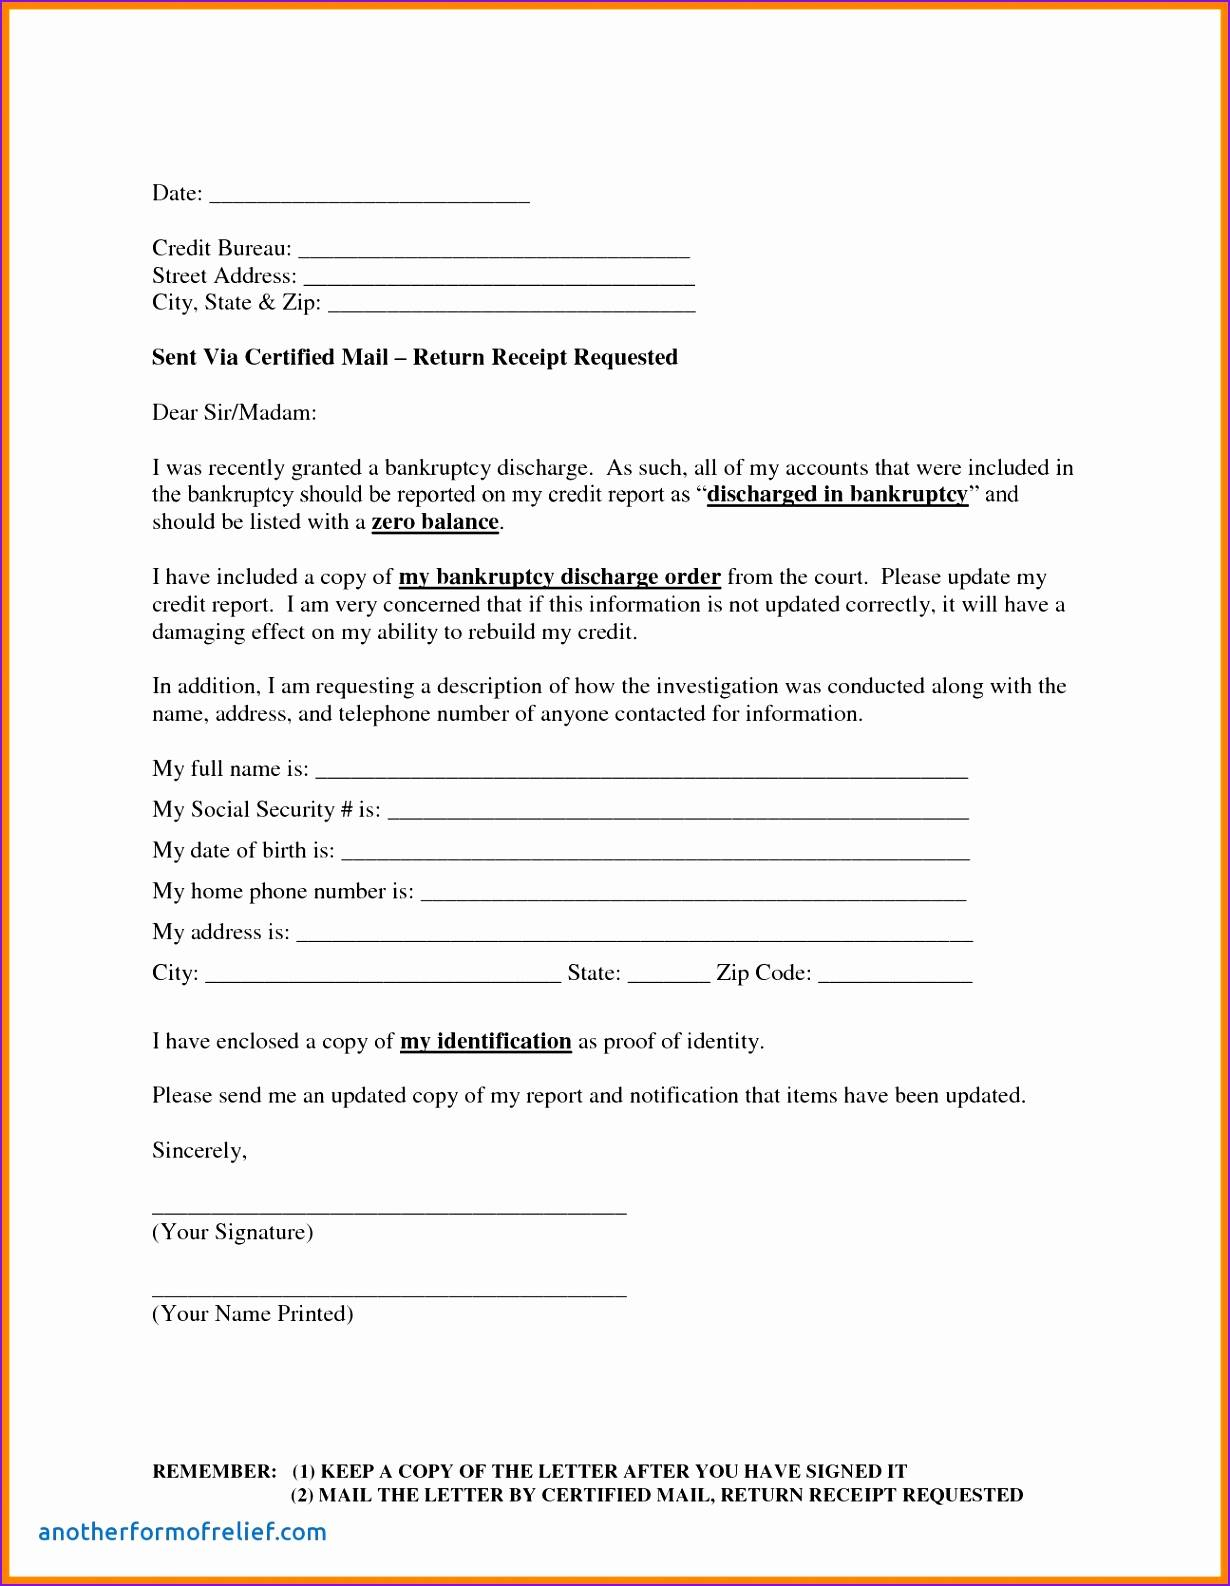 Letter Template to Dispute Credit Report - Credit Report Dispute Letter Template Fresh Credit Repair Letter